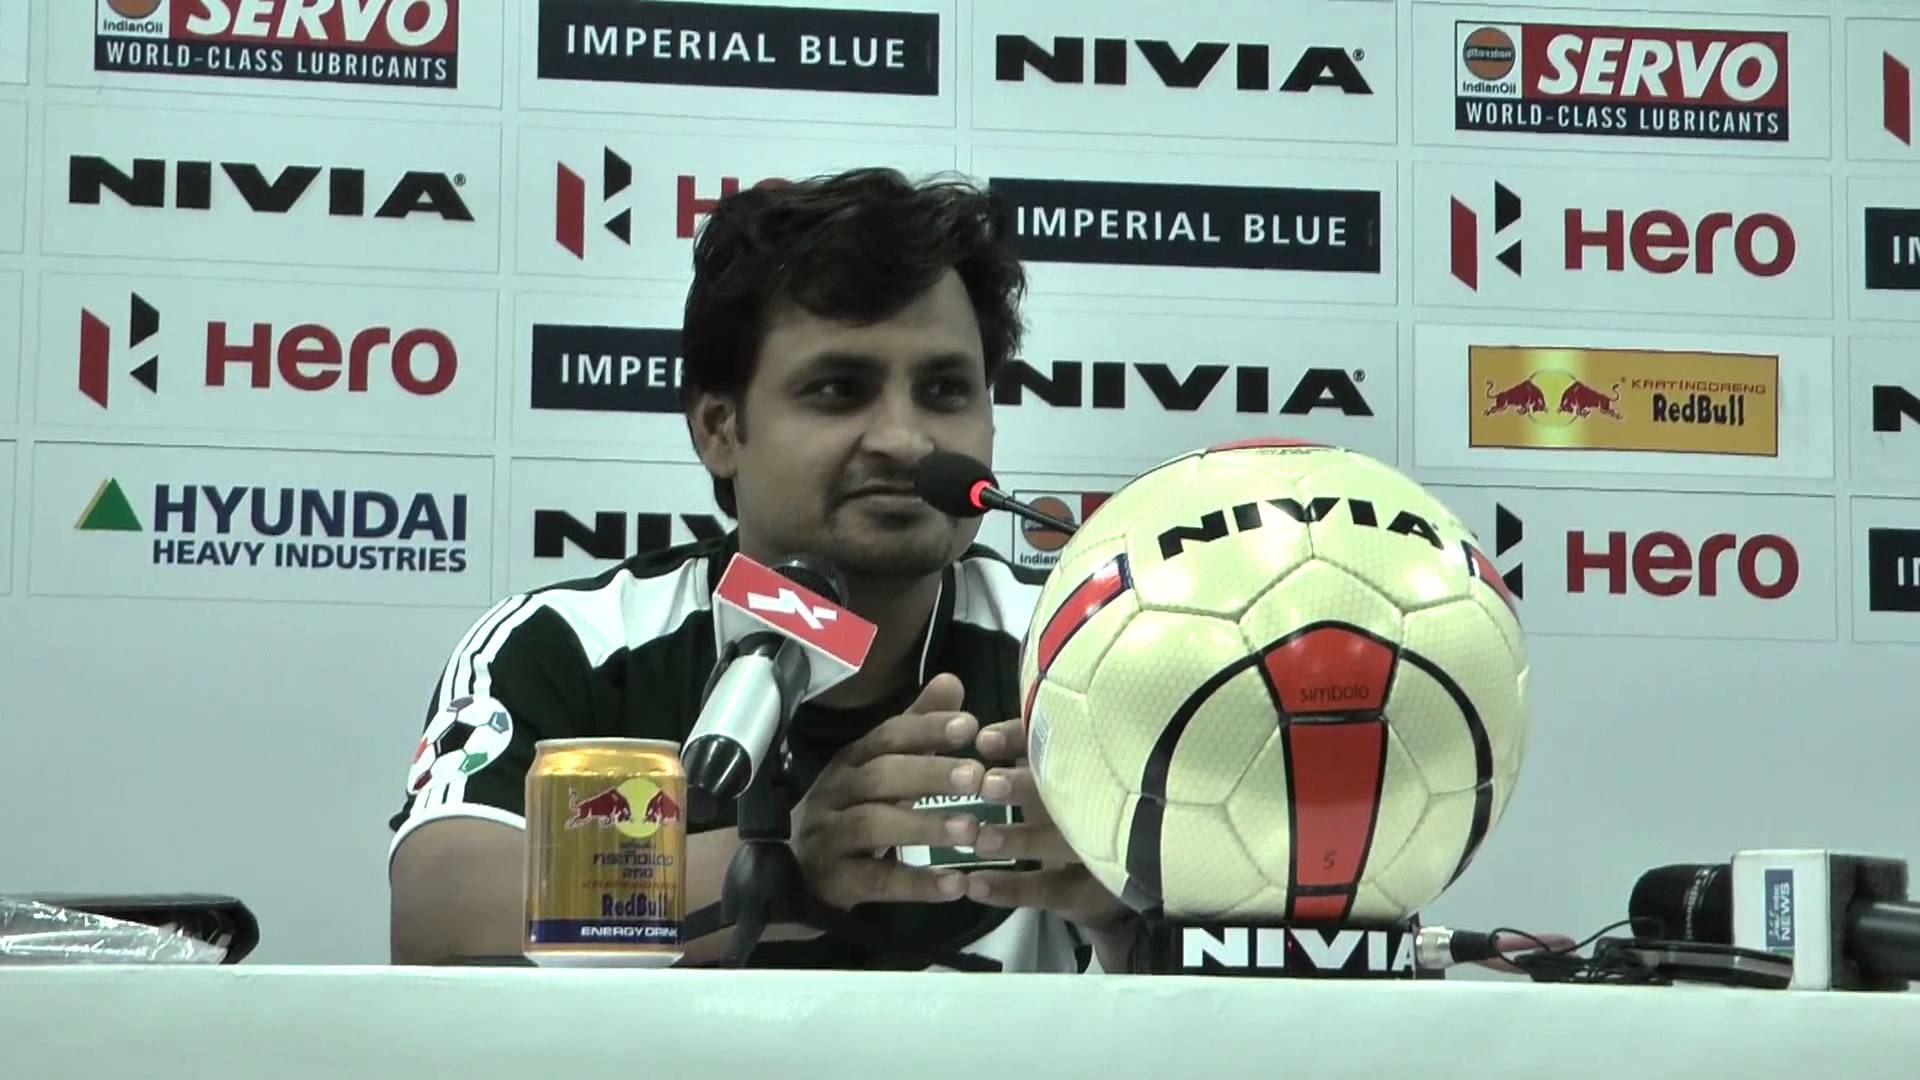 PAF boss Shahzad Anwar: We wanted to win the National Challenge Cup from the start